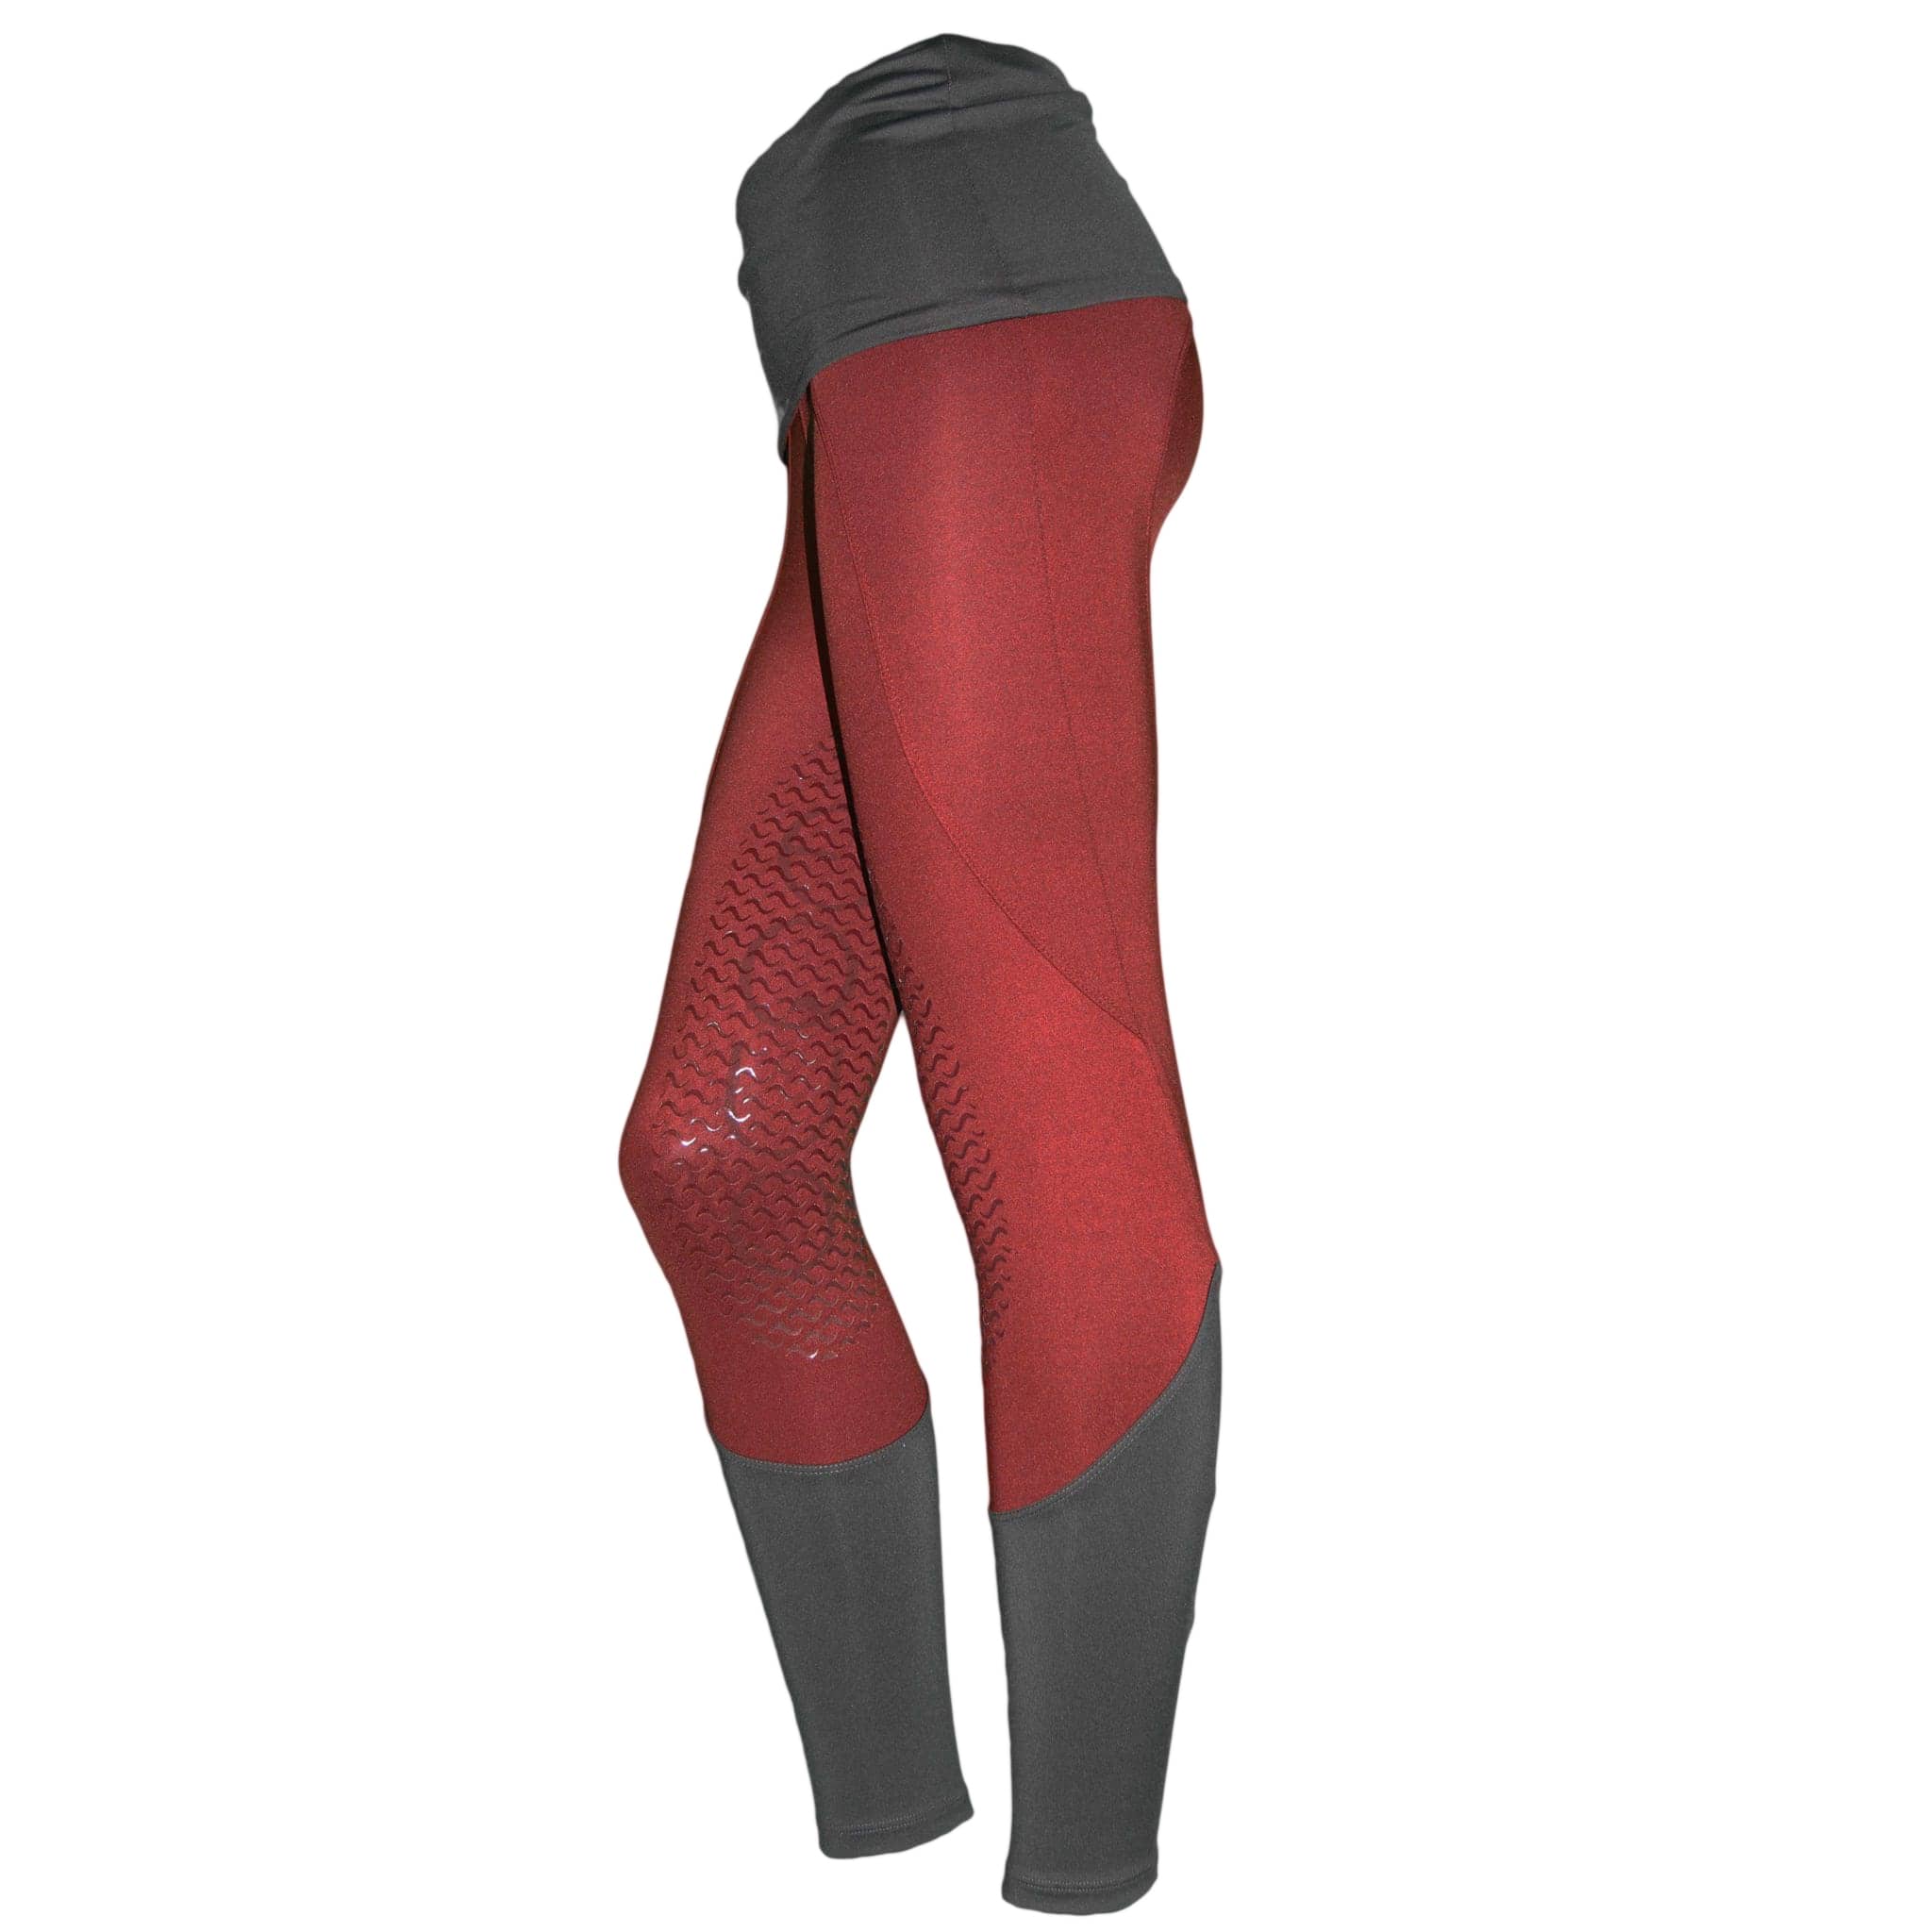 Breeches Designed for Anywhere Life Takes You